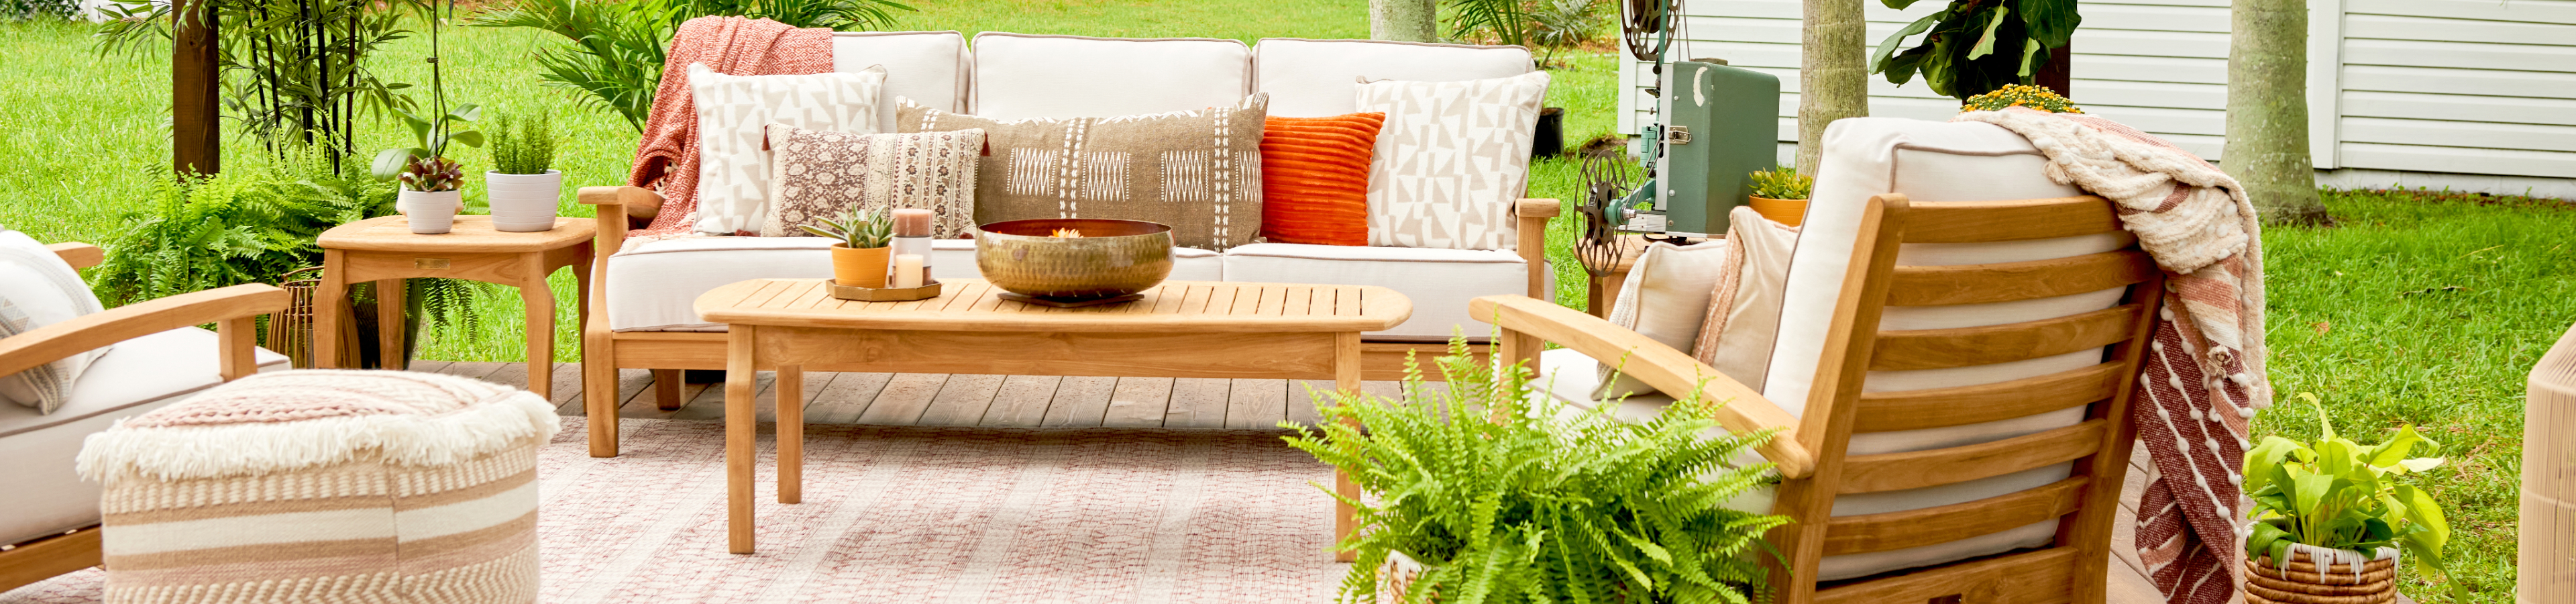 outdoor patio set with a rug underneath 